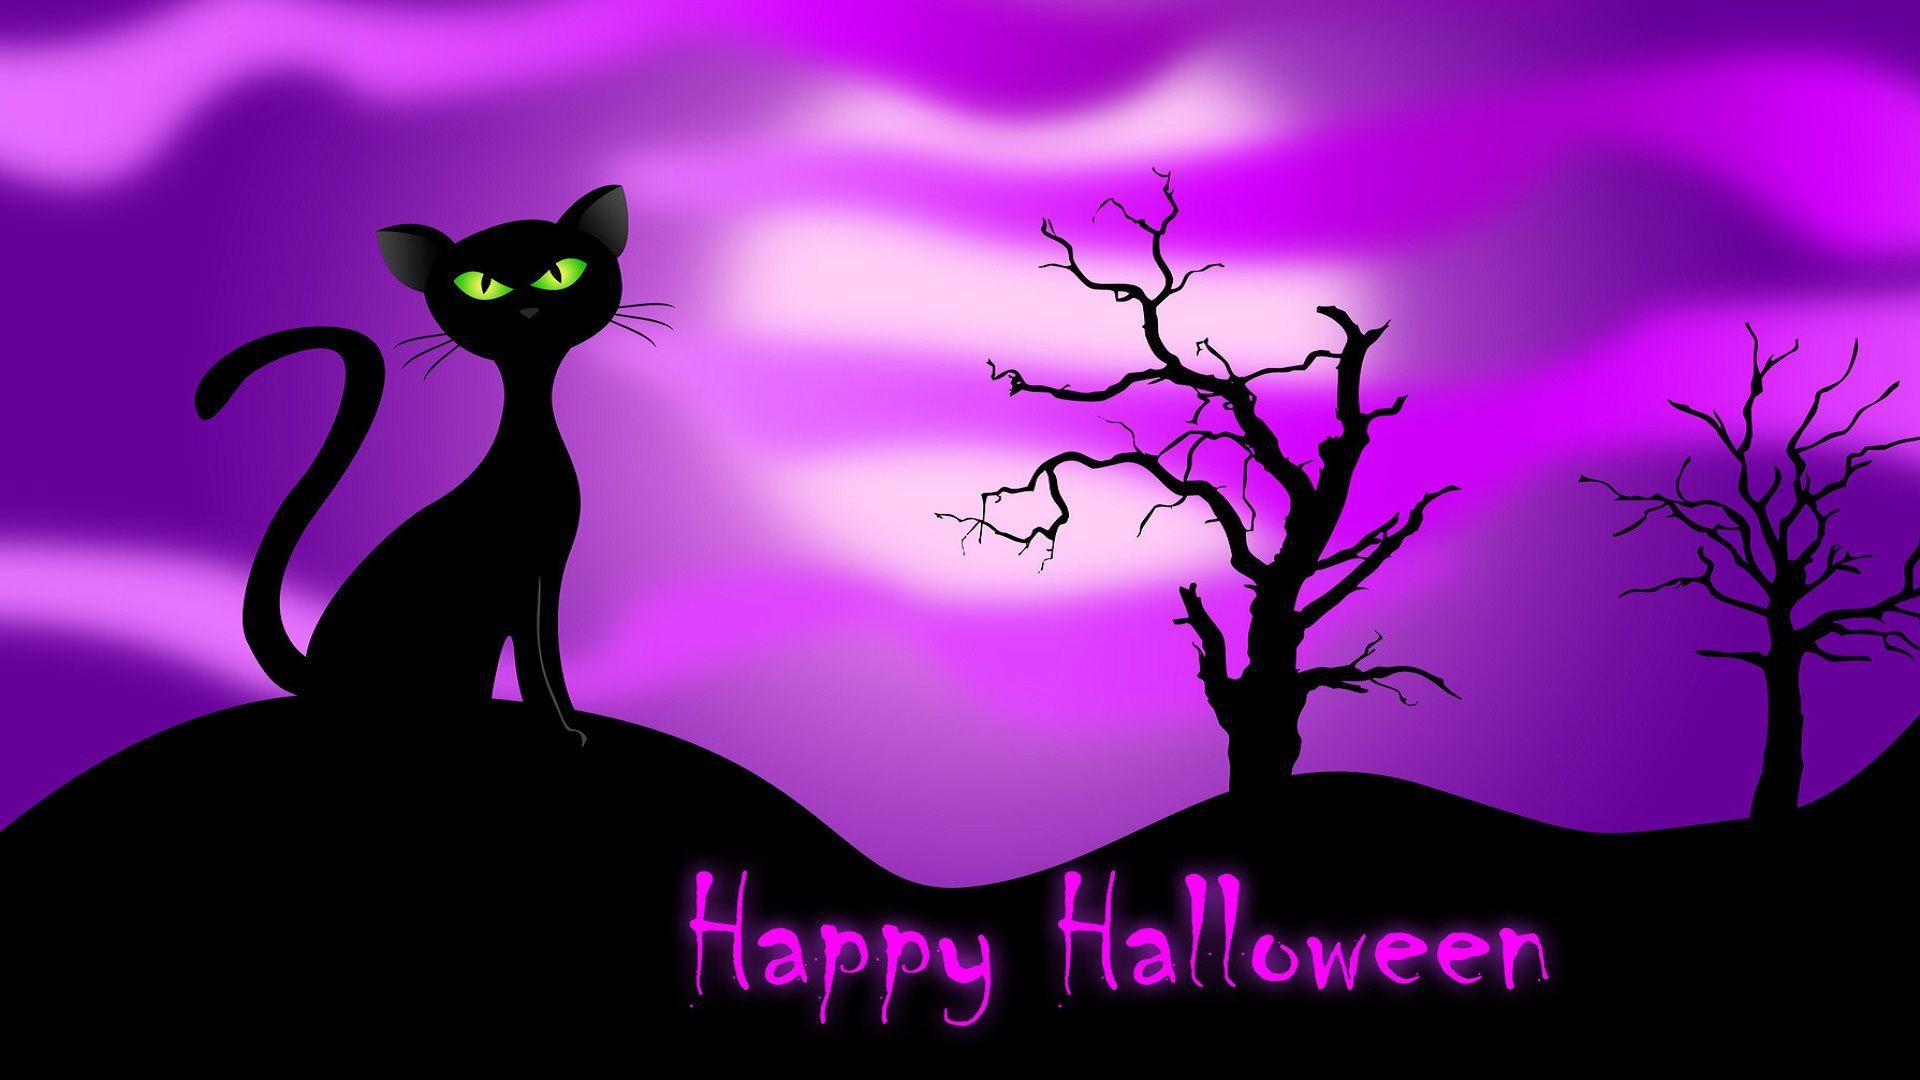 Happy Halloween Wallpaper Black Cat and Witch Vector Stock Vector   Illustration of animal poison 156927337